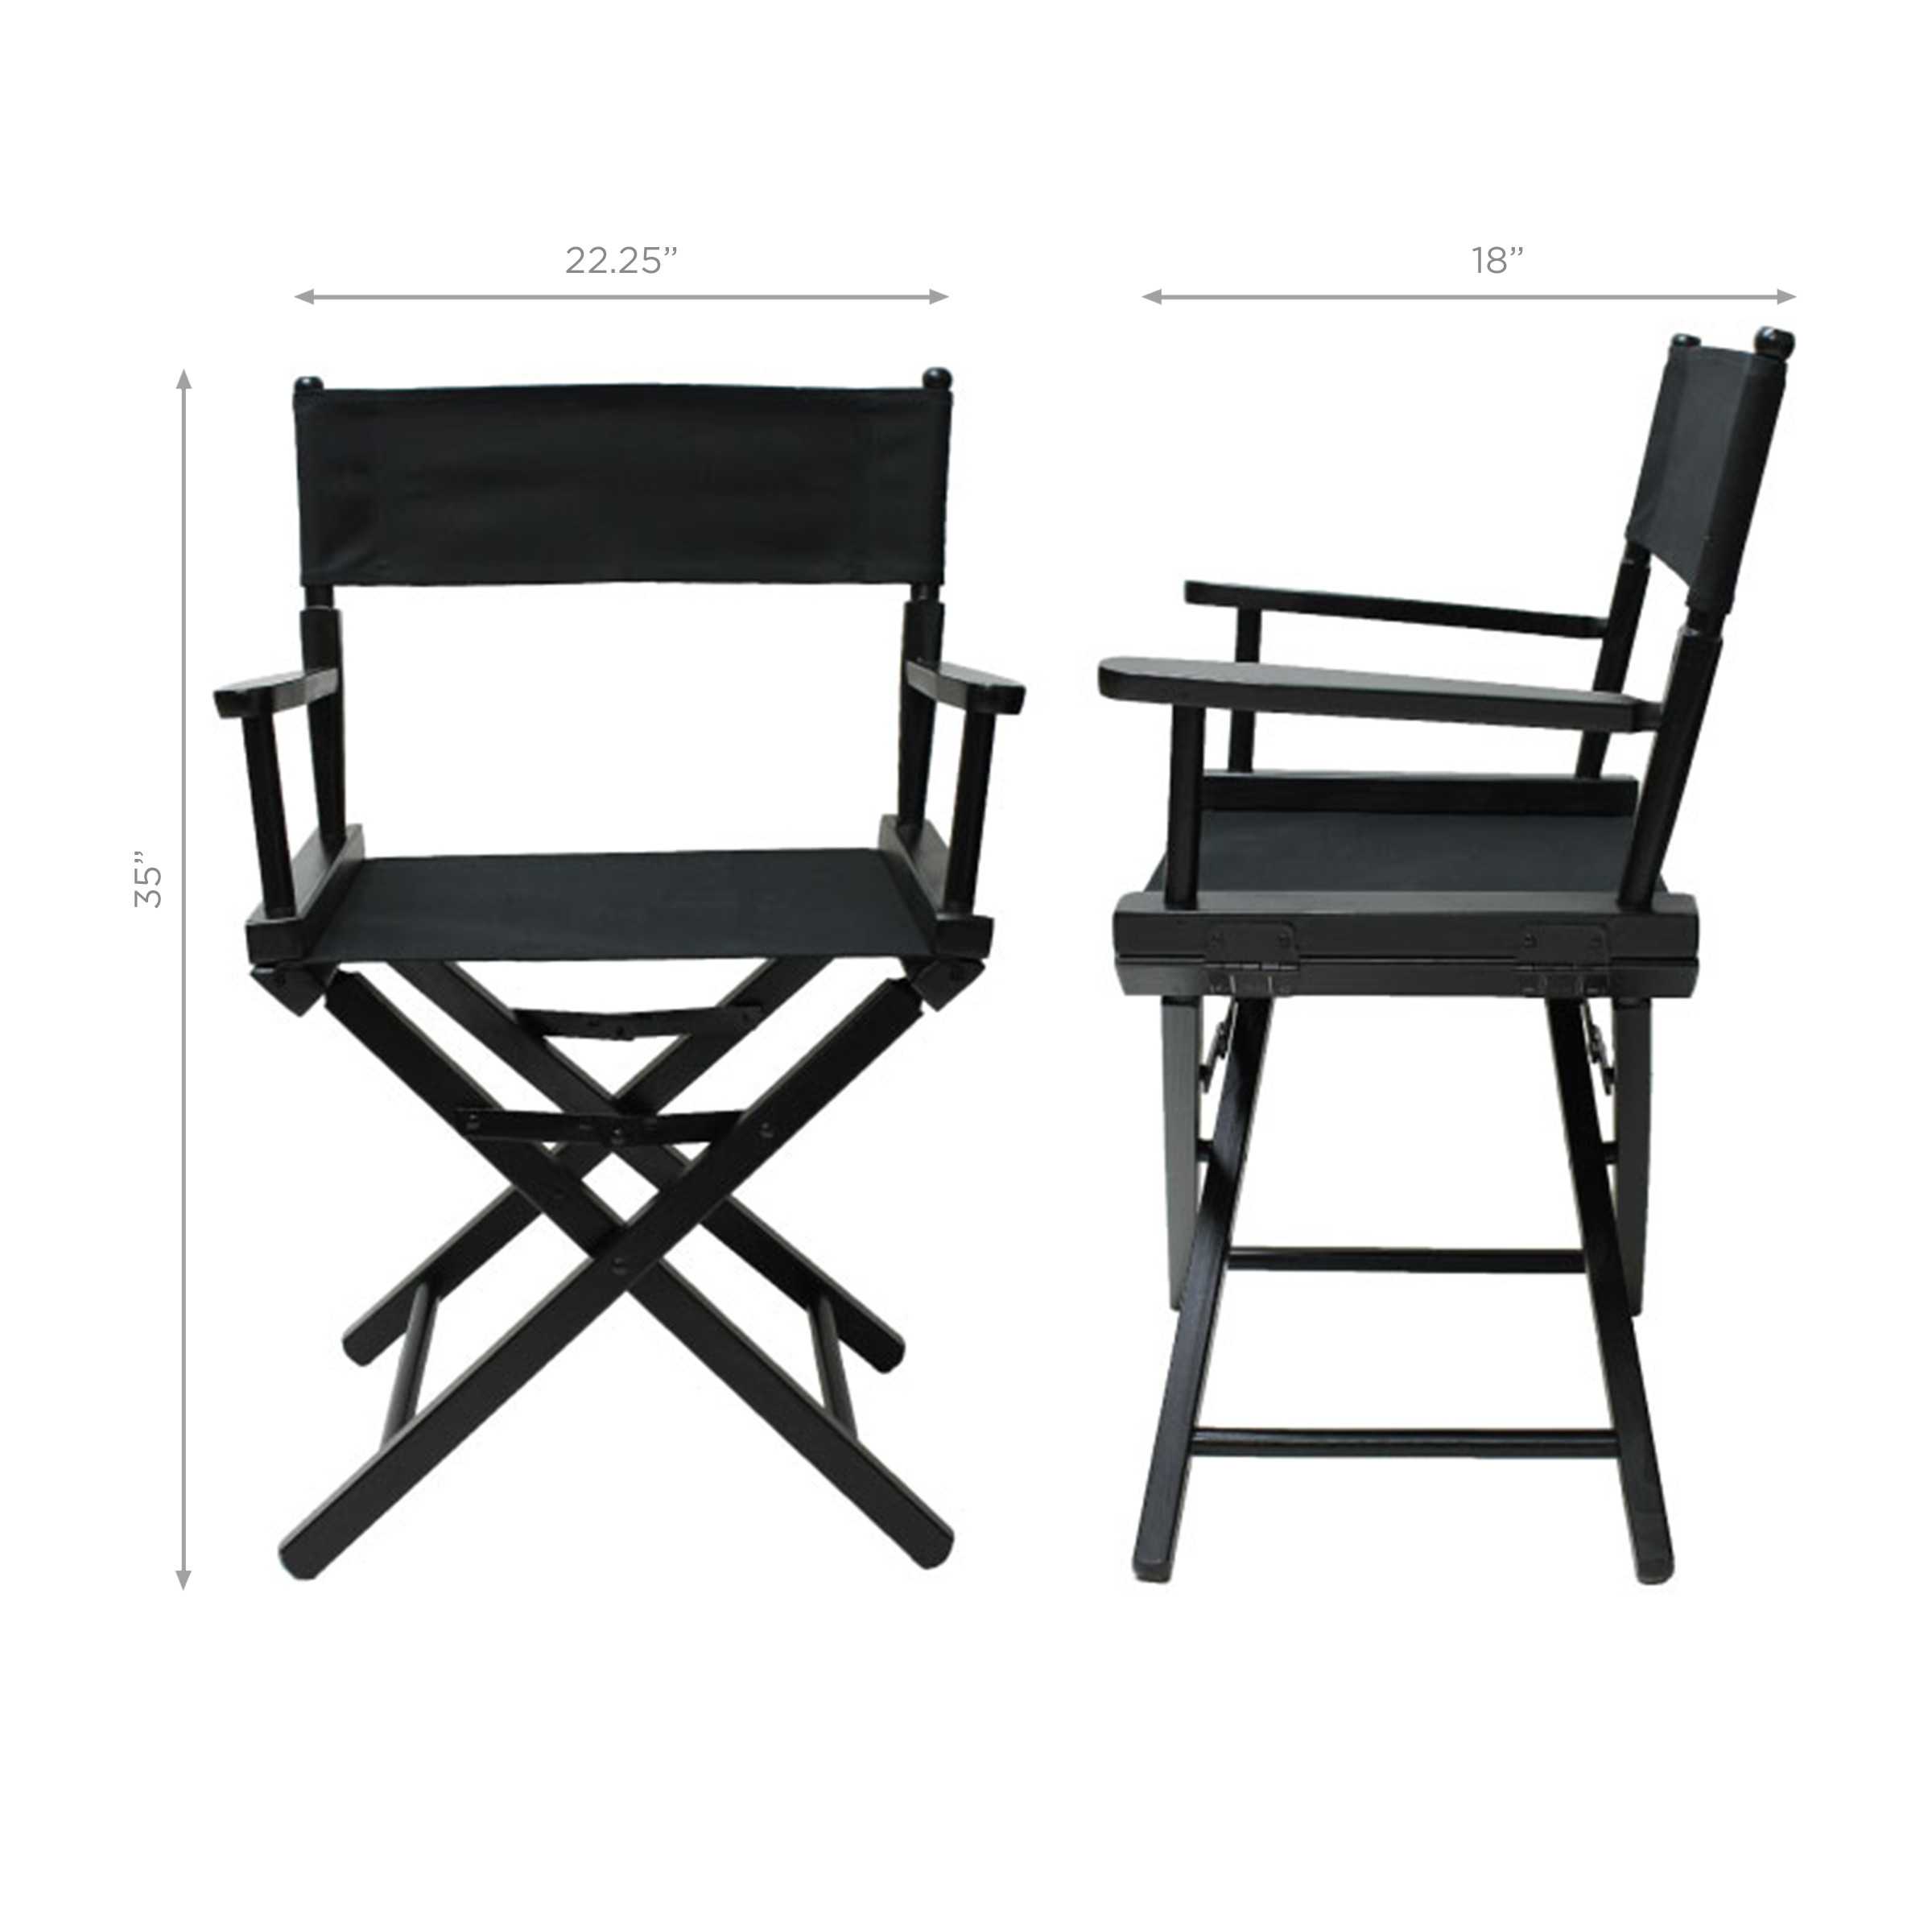 UNIVERSITY OF MICHIGAN DIRECTORS CHAIR-TABLE HEIGHT